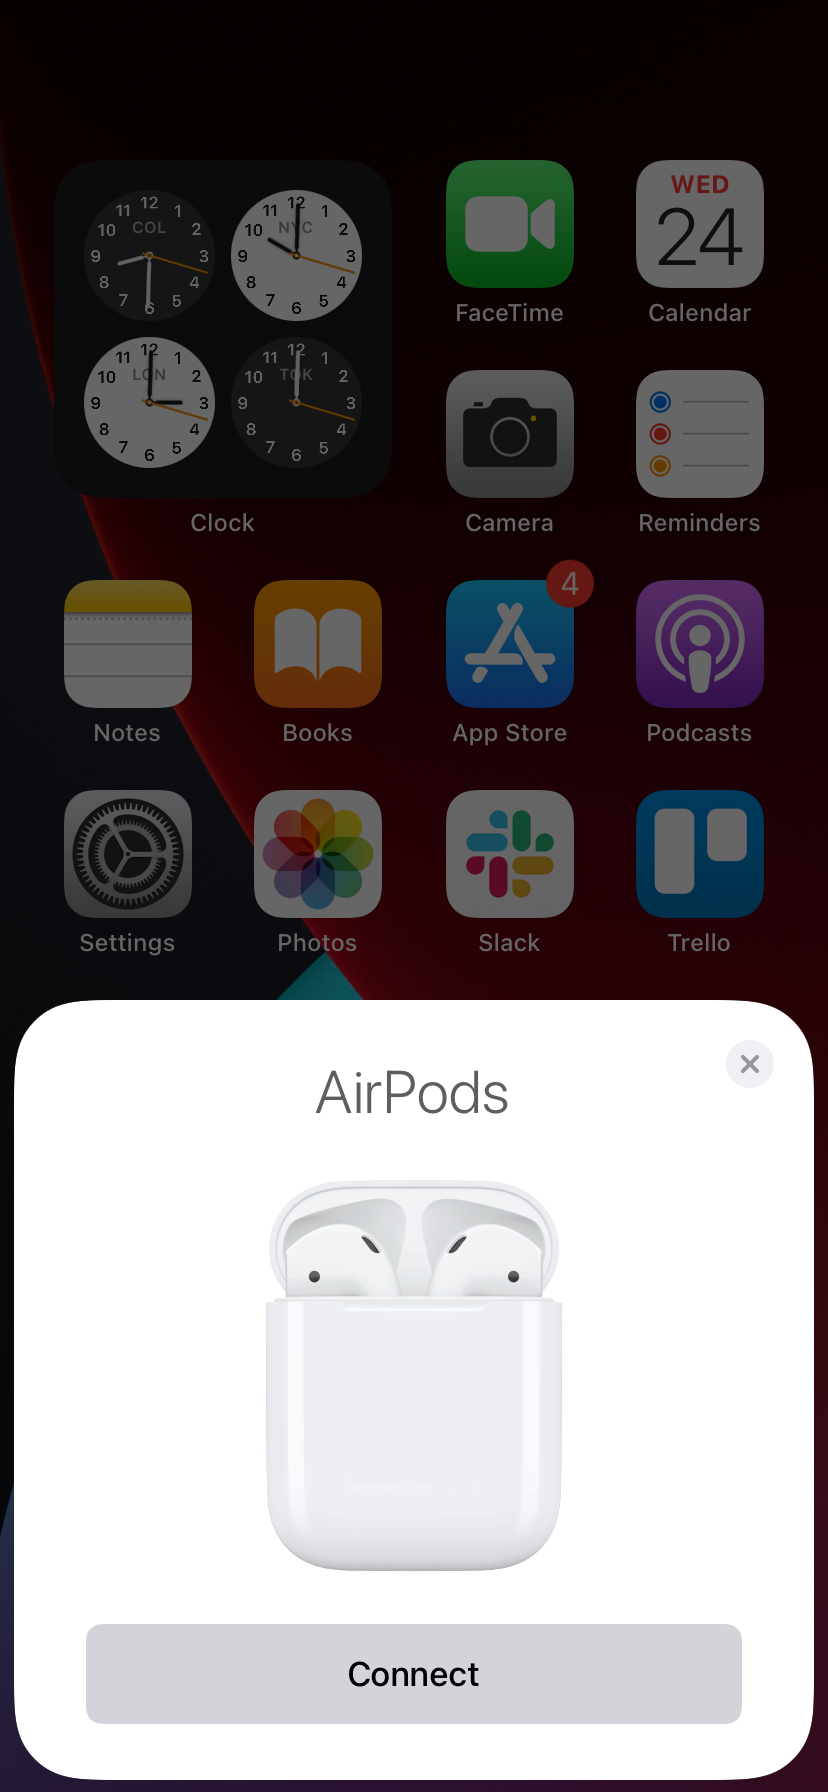 Tap Connect on AirPods notification.